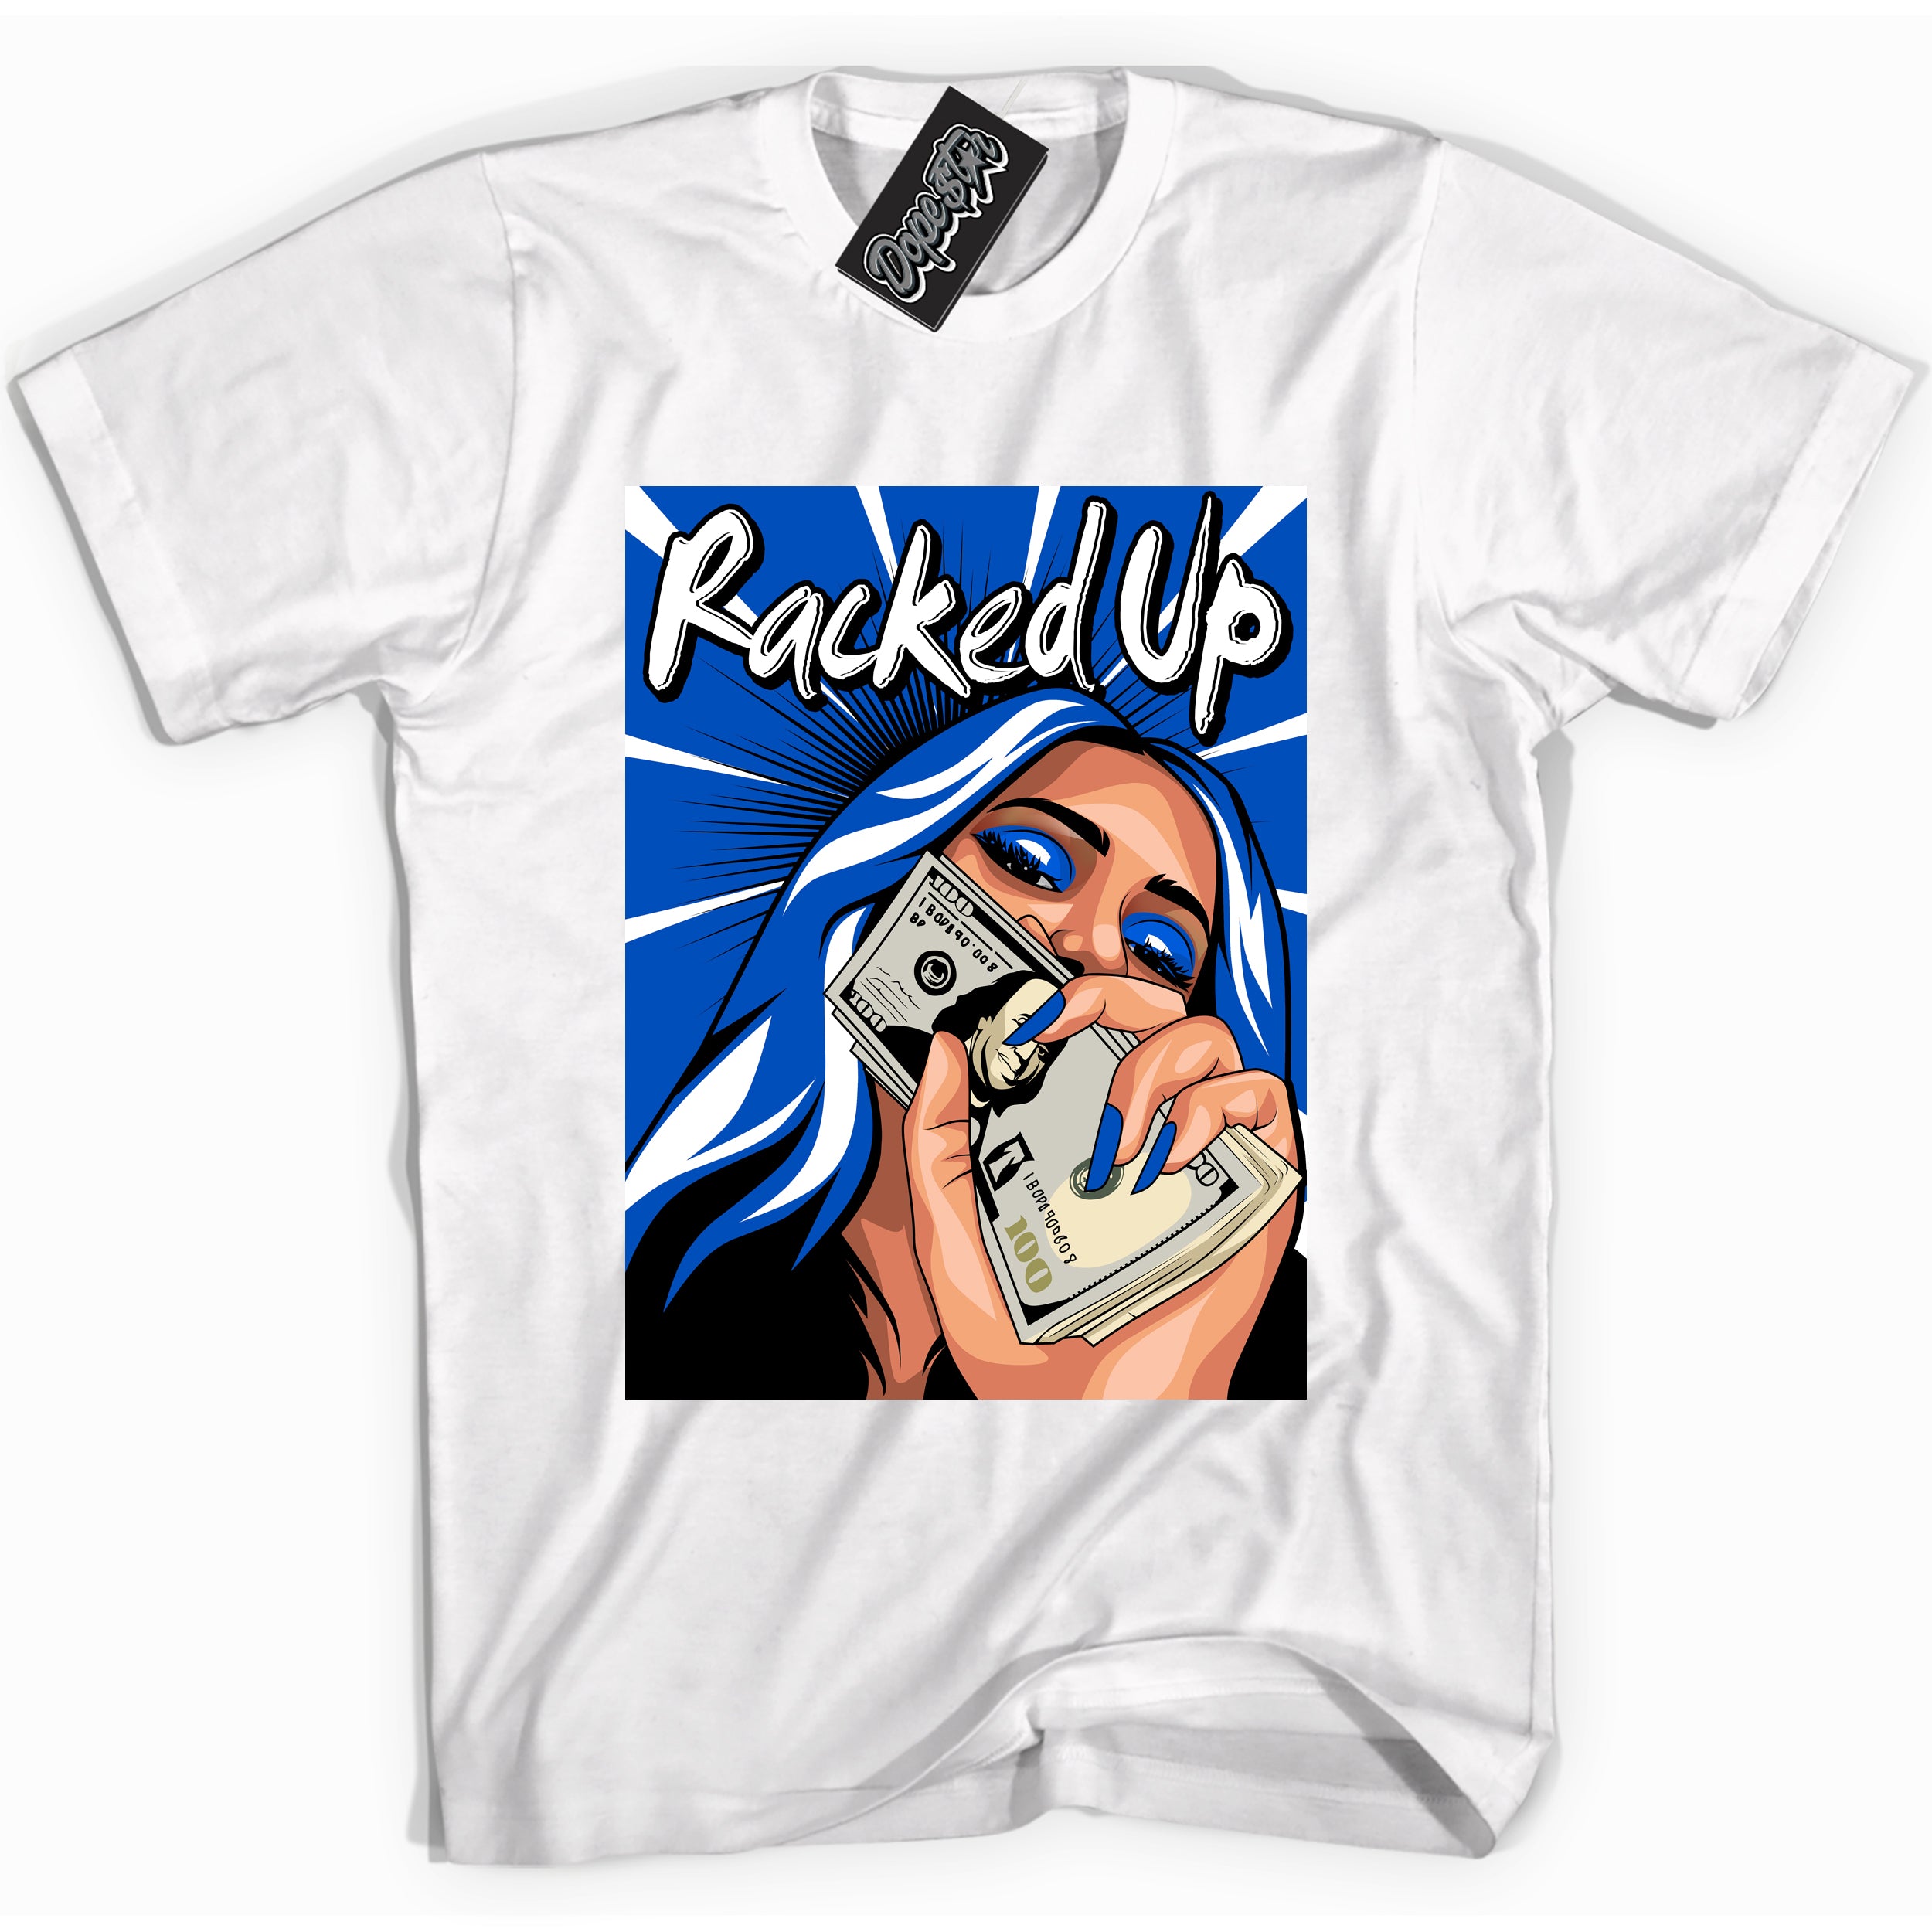 Cool White graphic tee with "Racked Up" design, that perfectly matches Royal Reimagined 1s sneakers 